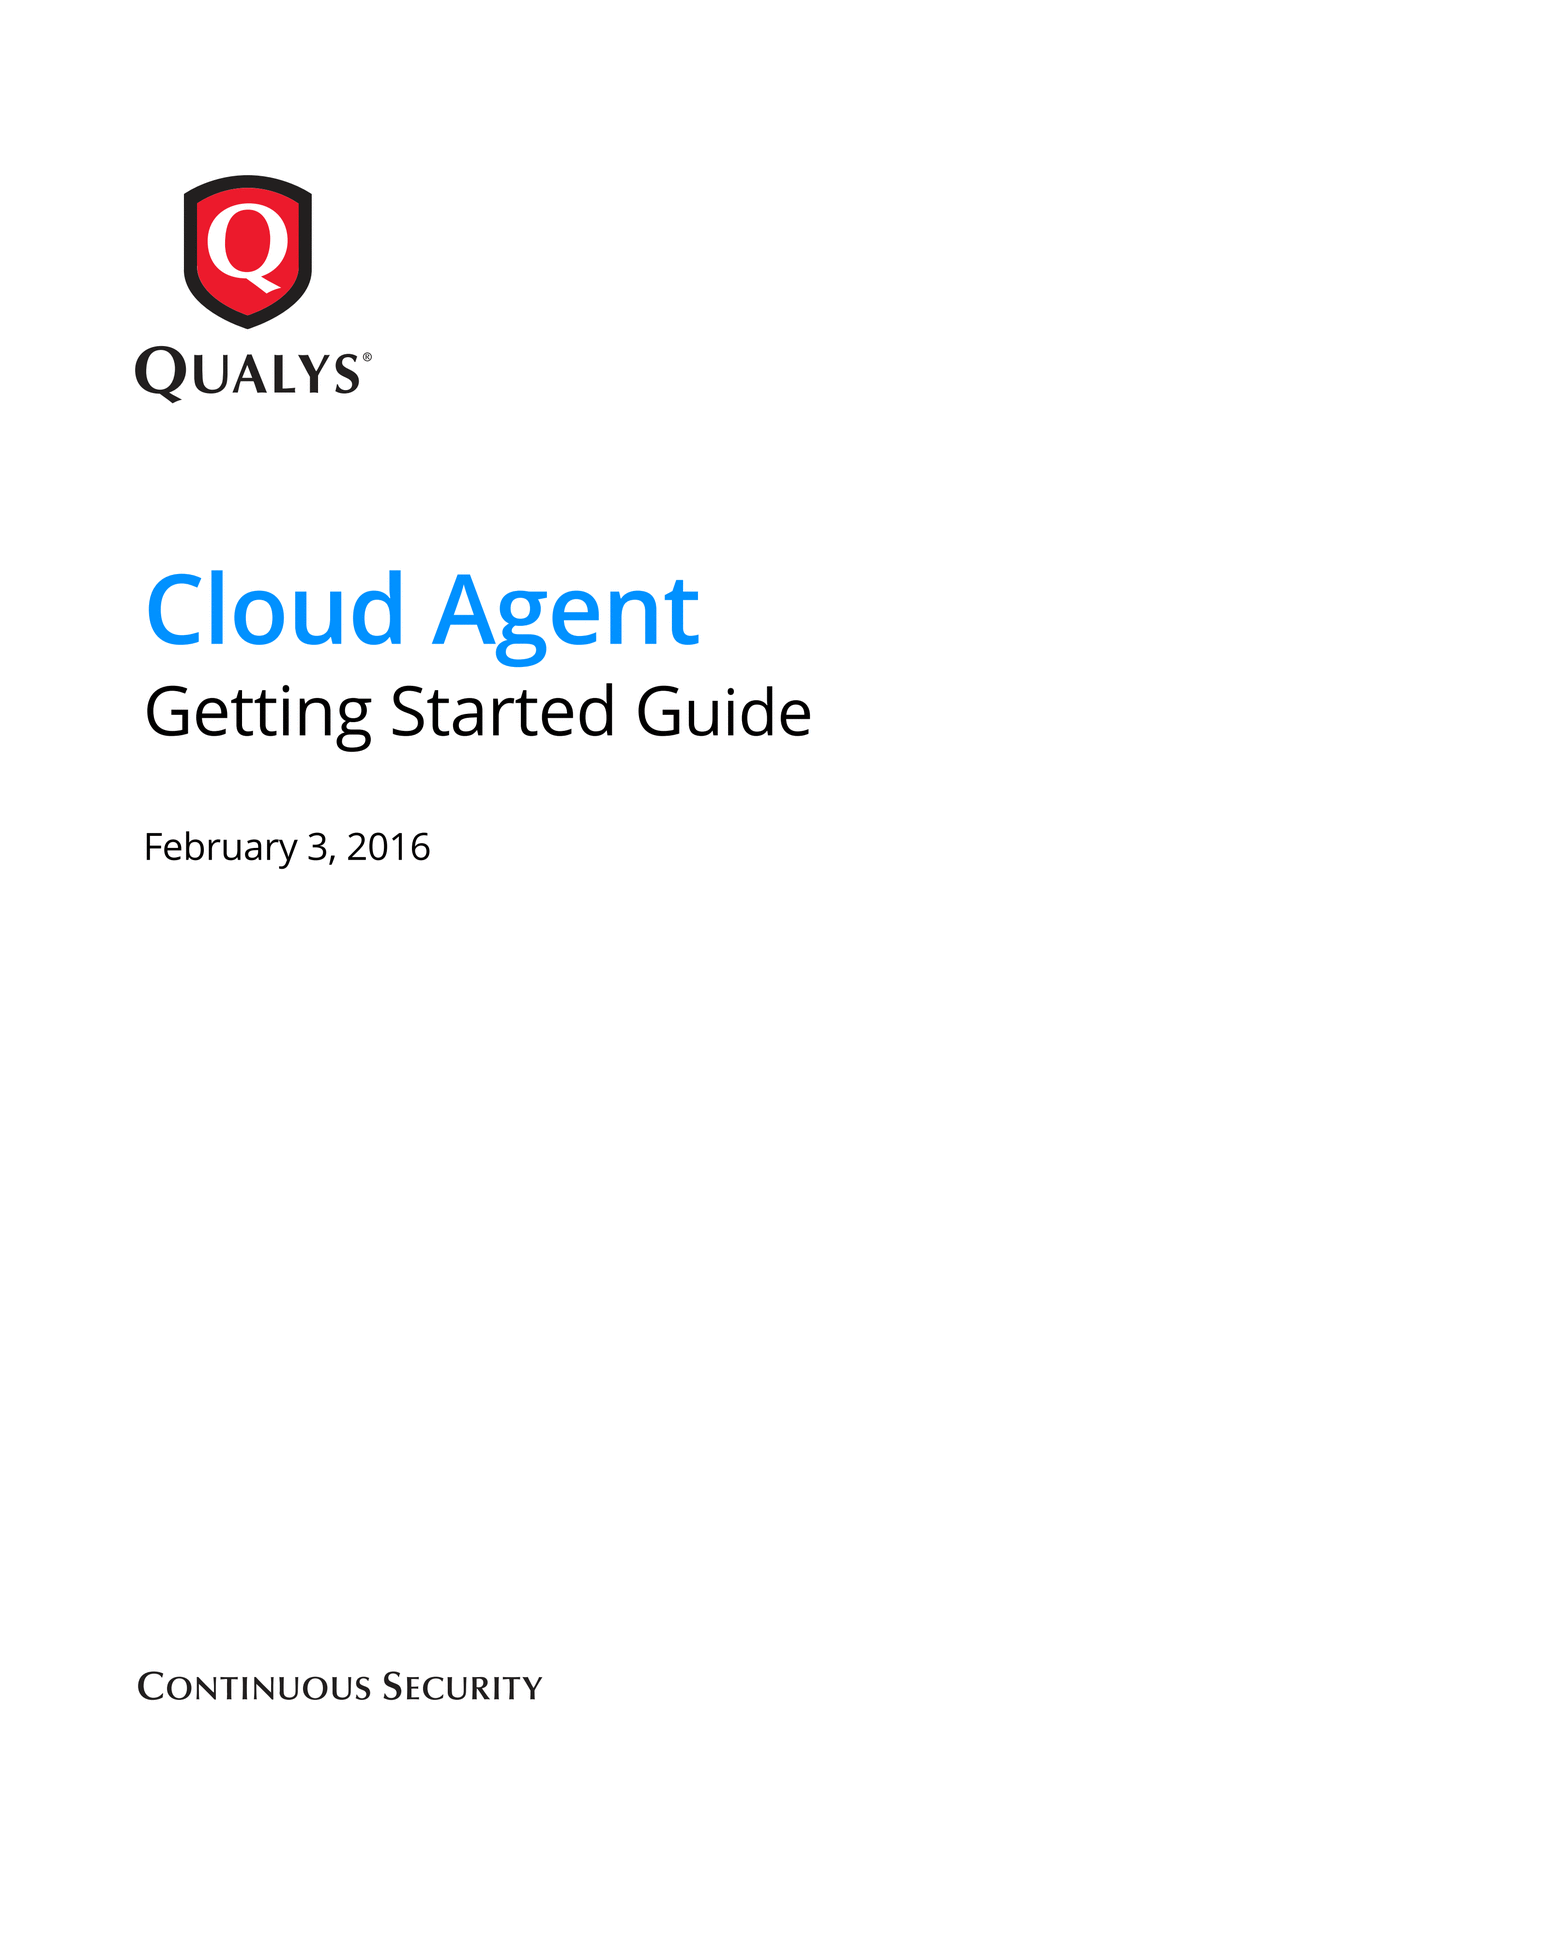 qualys: qualys-cloud-agent-getting-started-guide.pdf